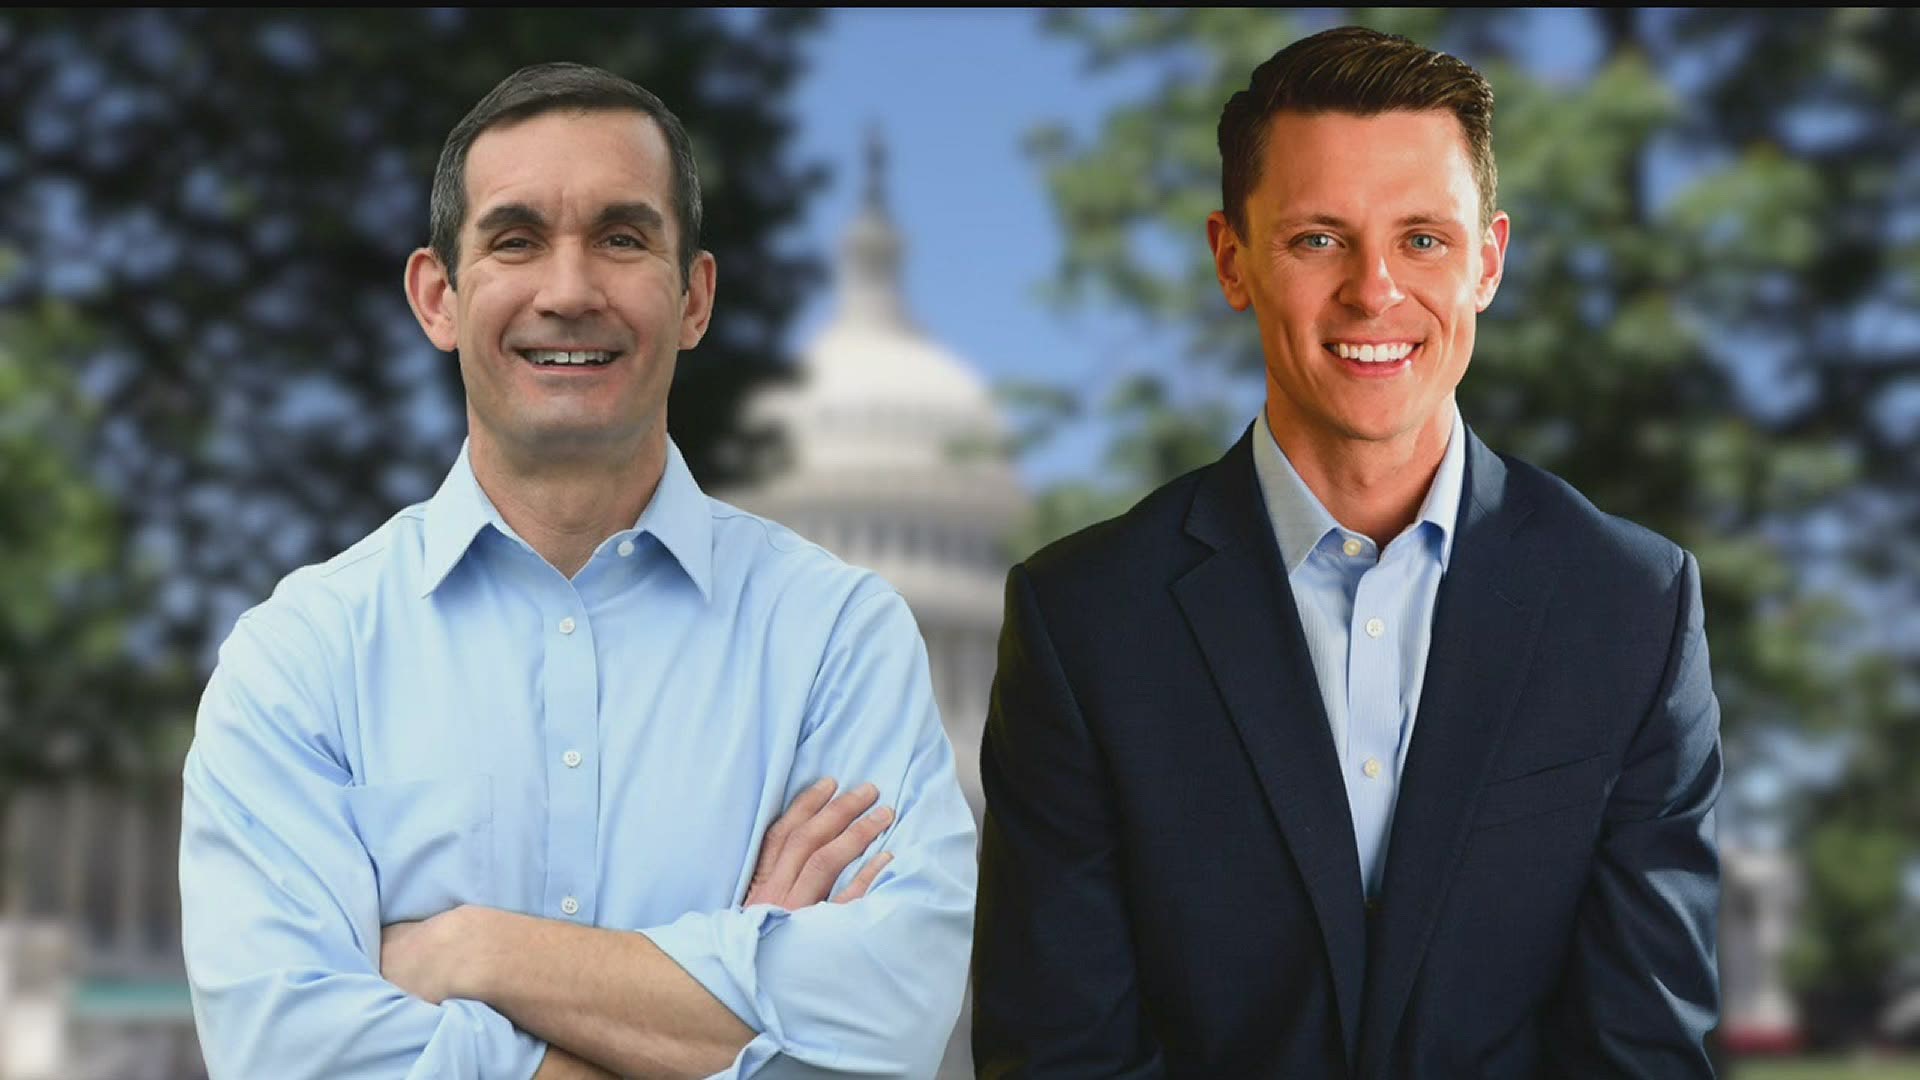 Meet The Candidates DePasquale, Brier vie for Democratic nomination in PA-10 Congressional District fox43